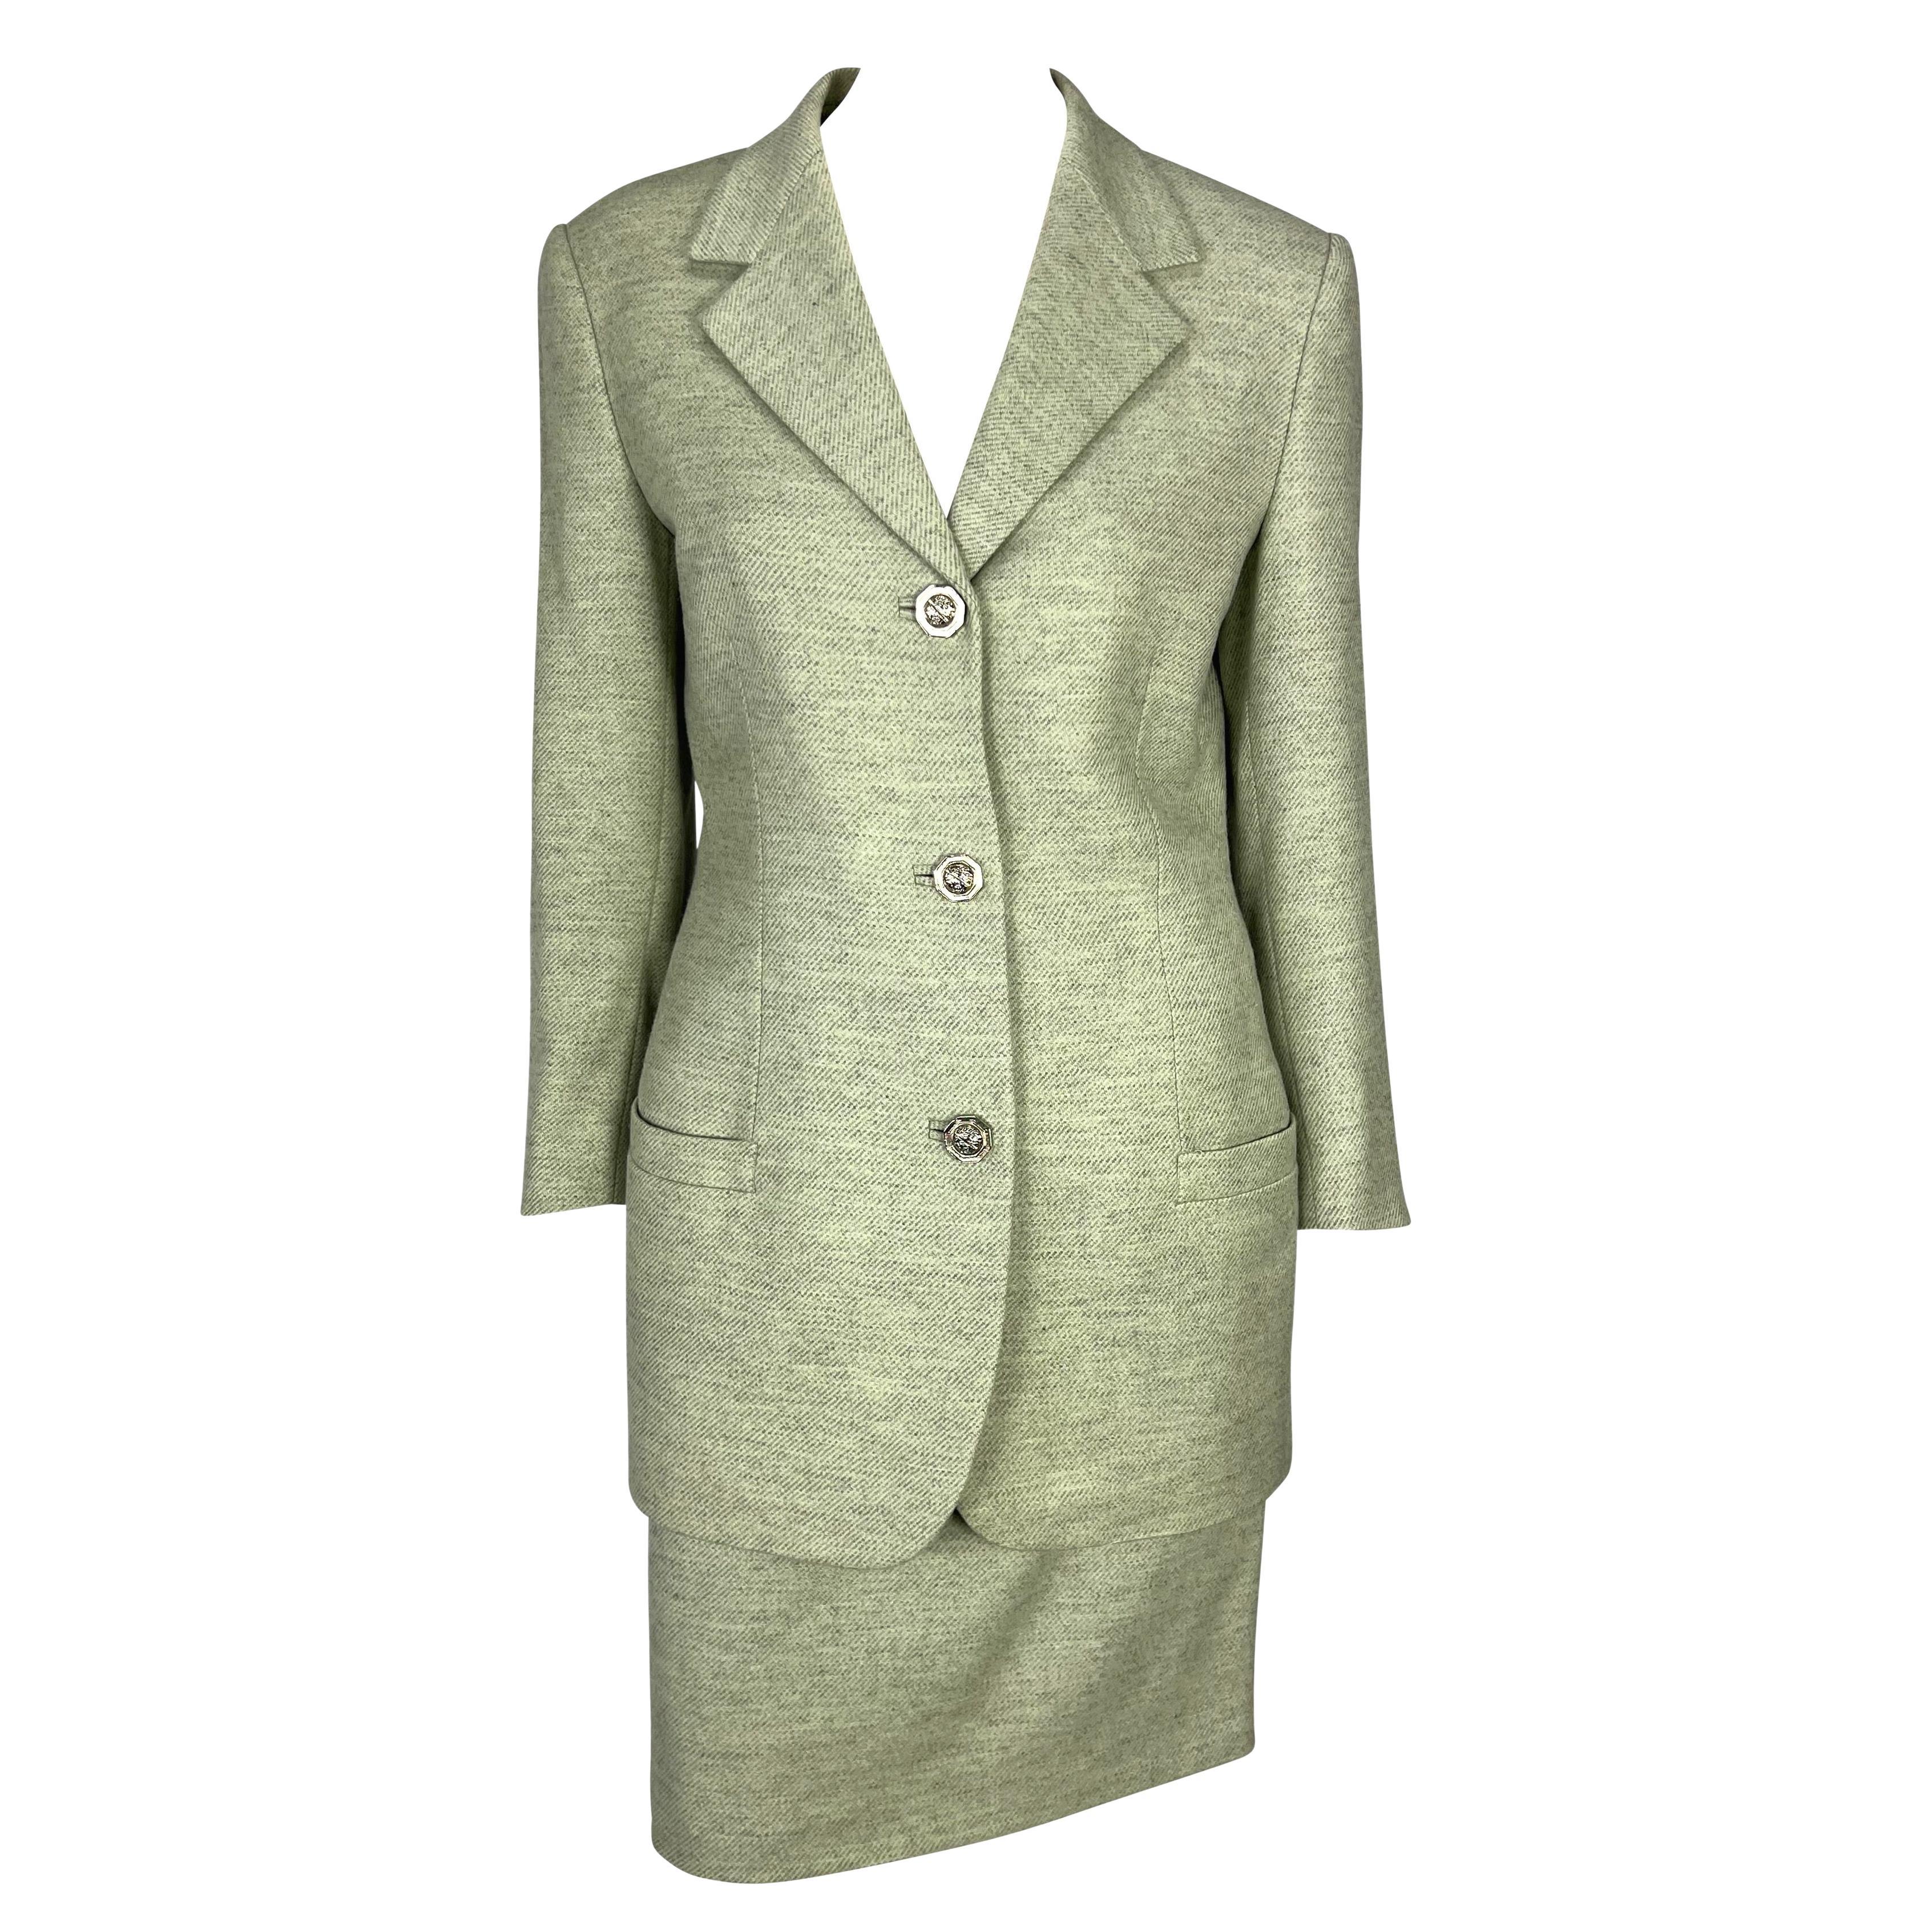 1994 Gianni Versace Couture Medusa Hardware Green Wool Cashmere Skirt Suit For Sale